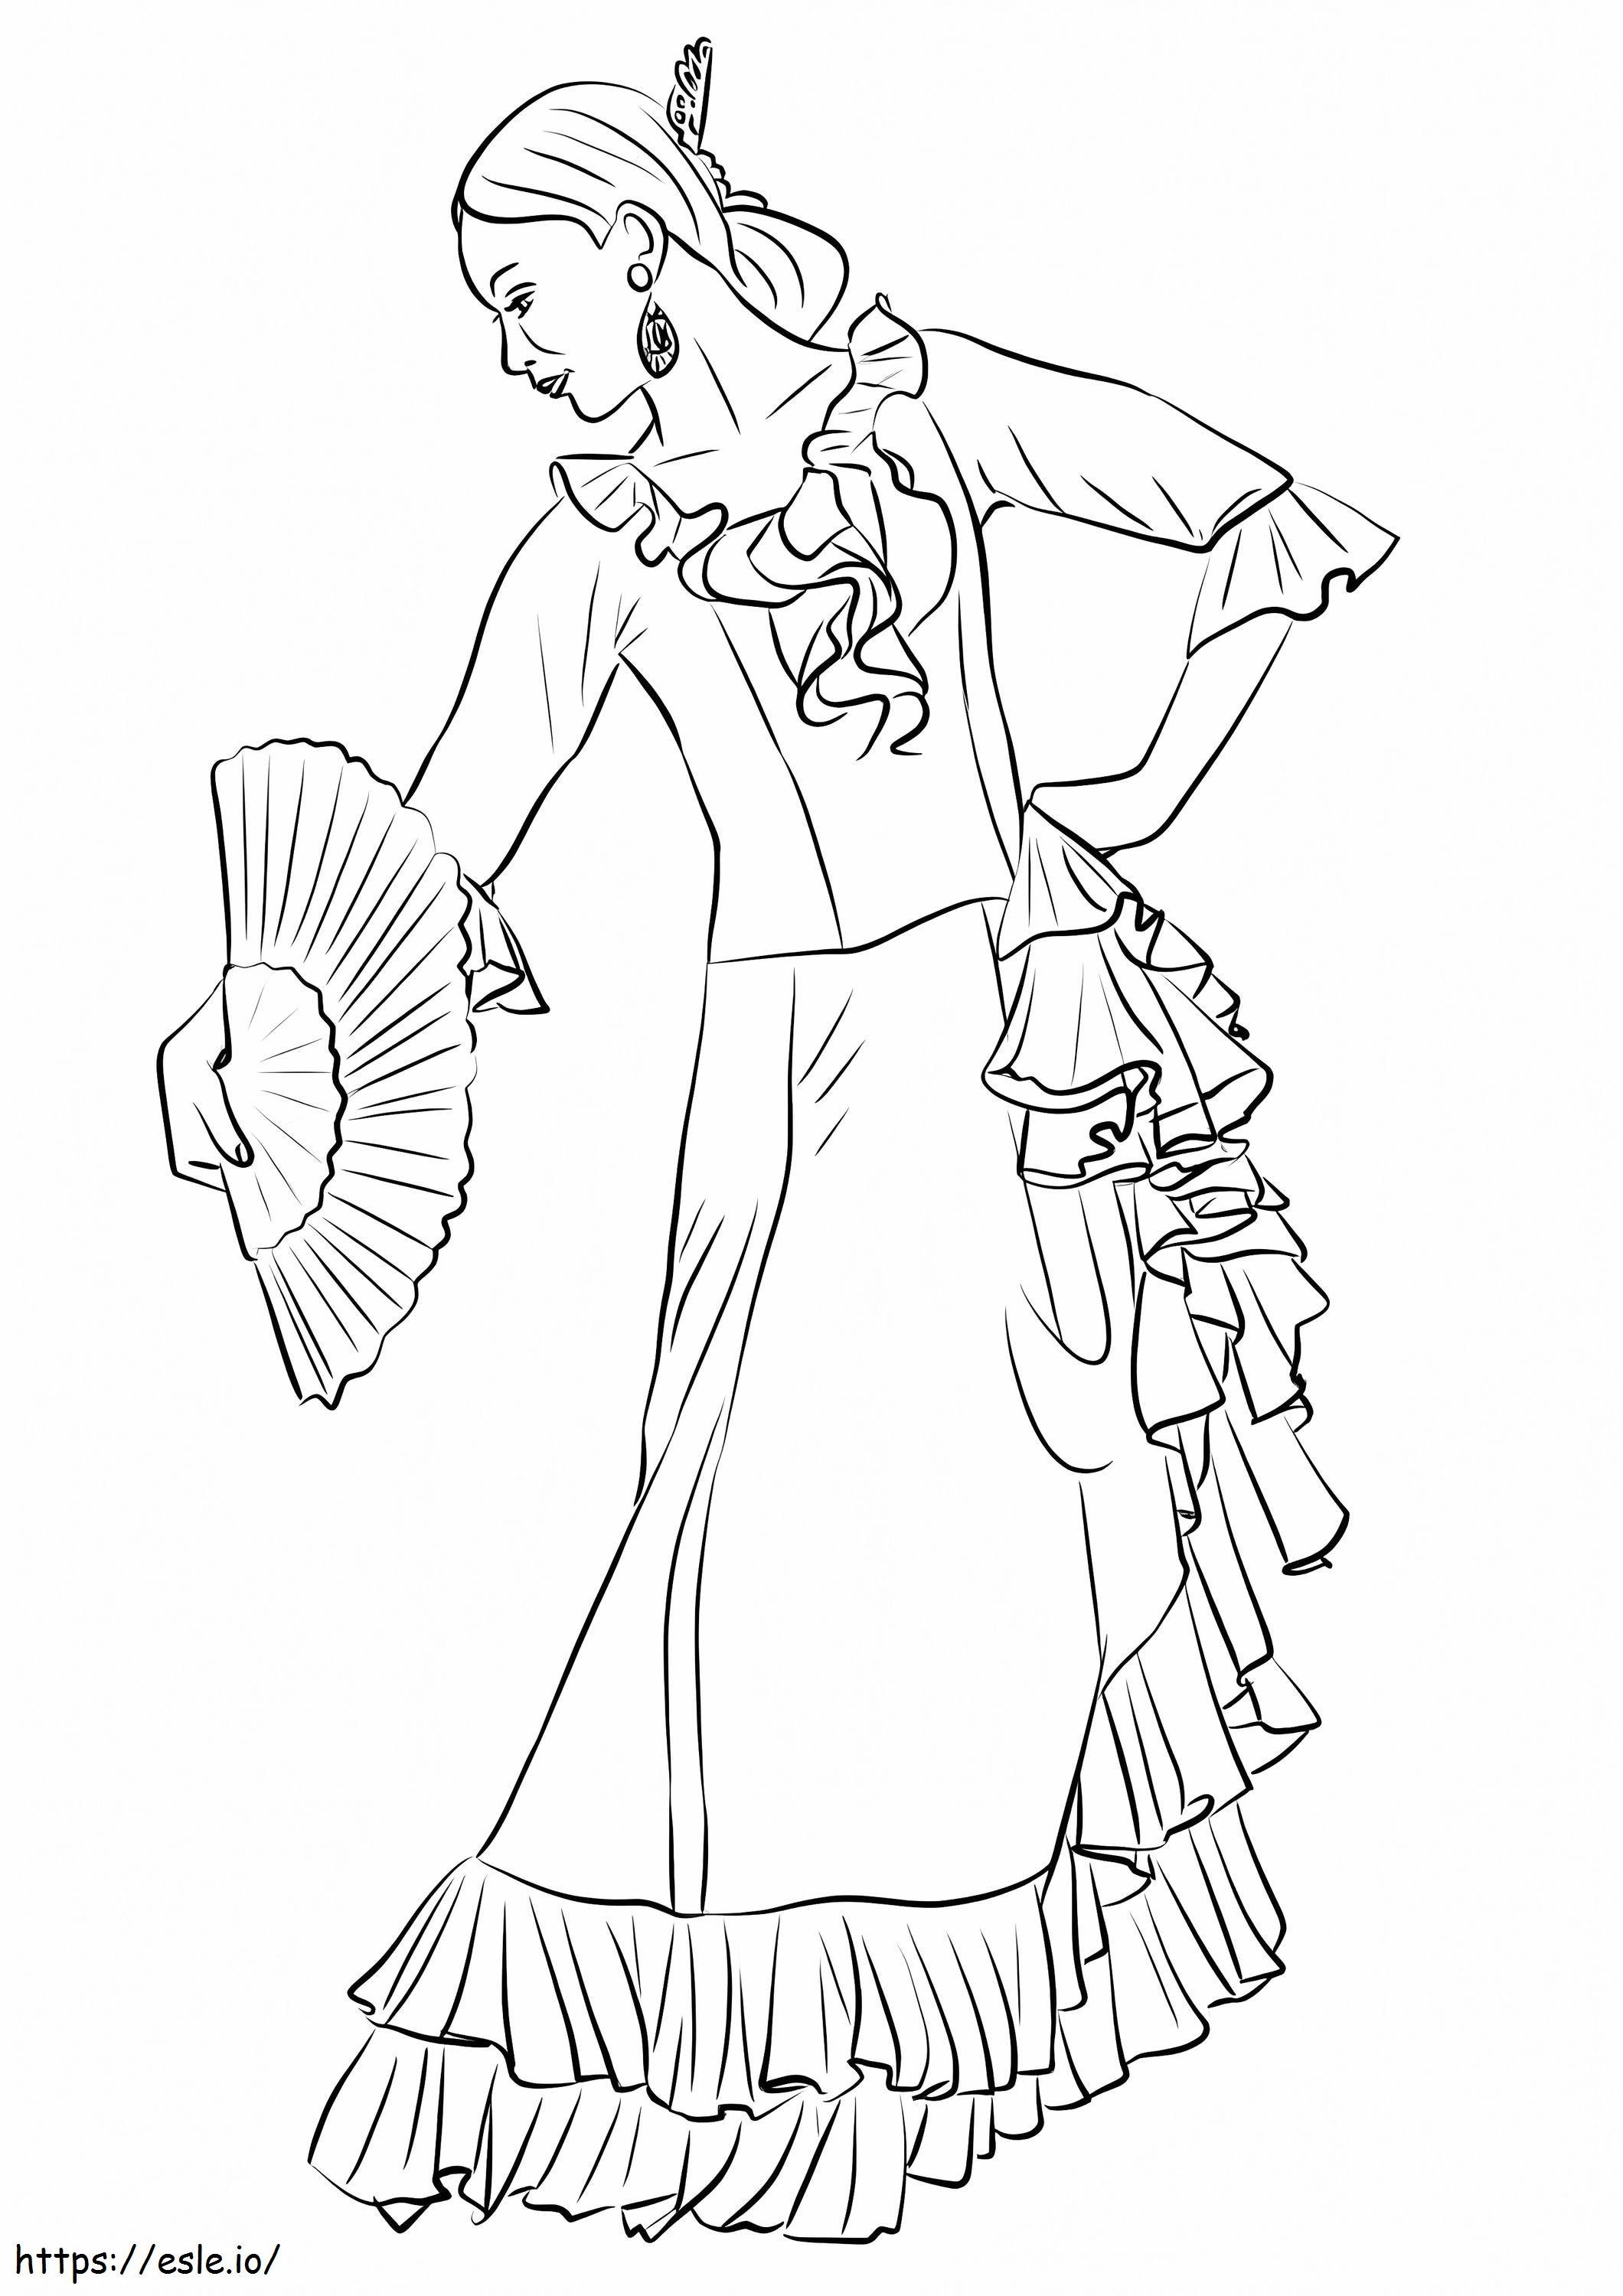 Spanish Flamenco Dancer coloring page